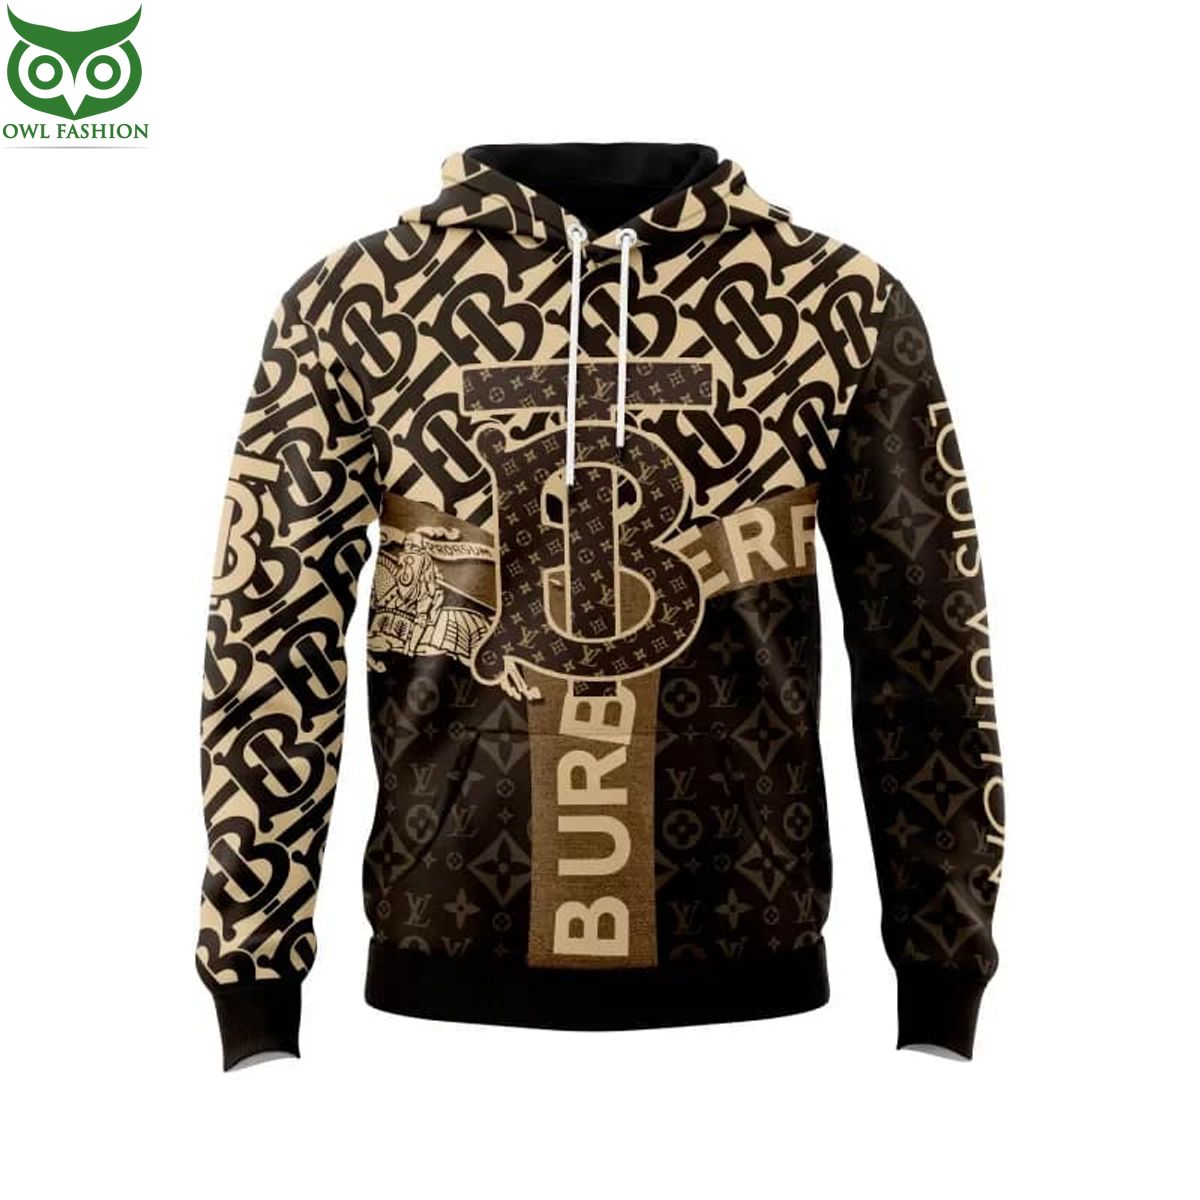 TRENDING] Louis Vuitton Black Gold Luxury Brand Hoodie Pants Limited Edition